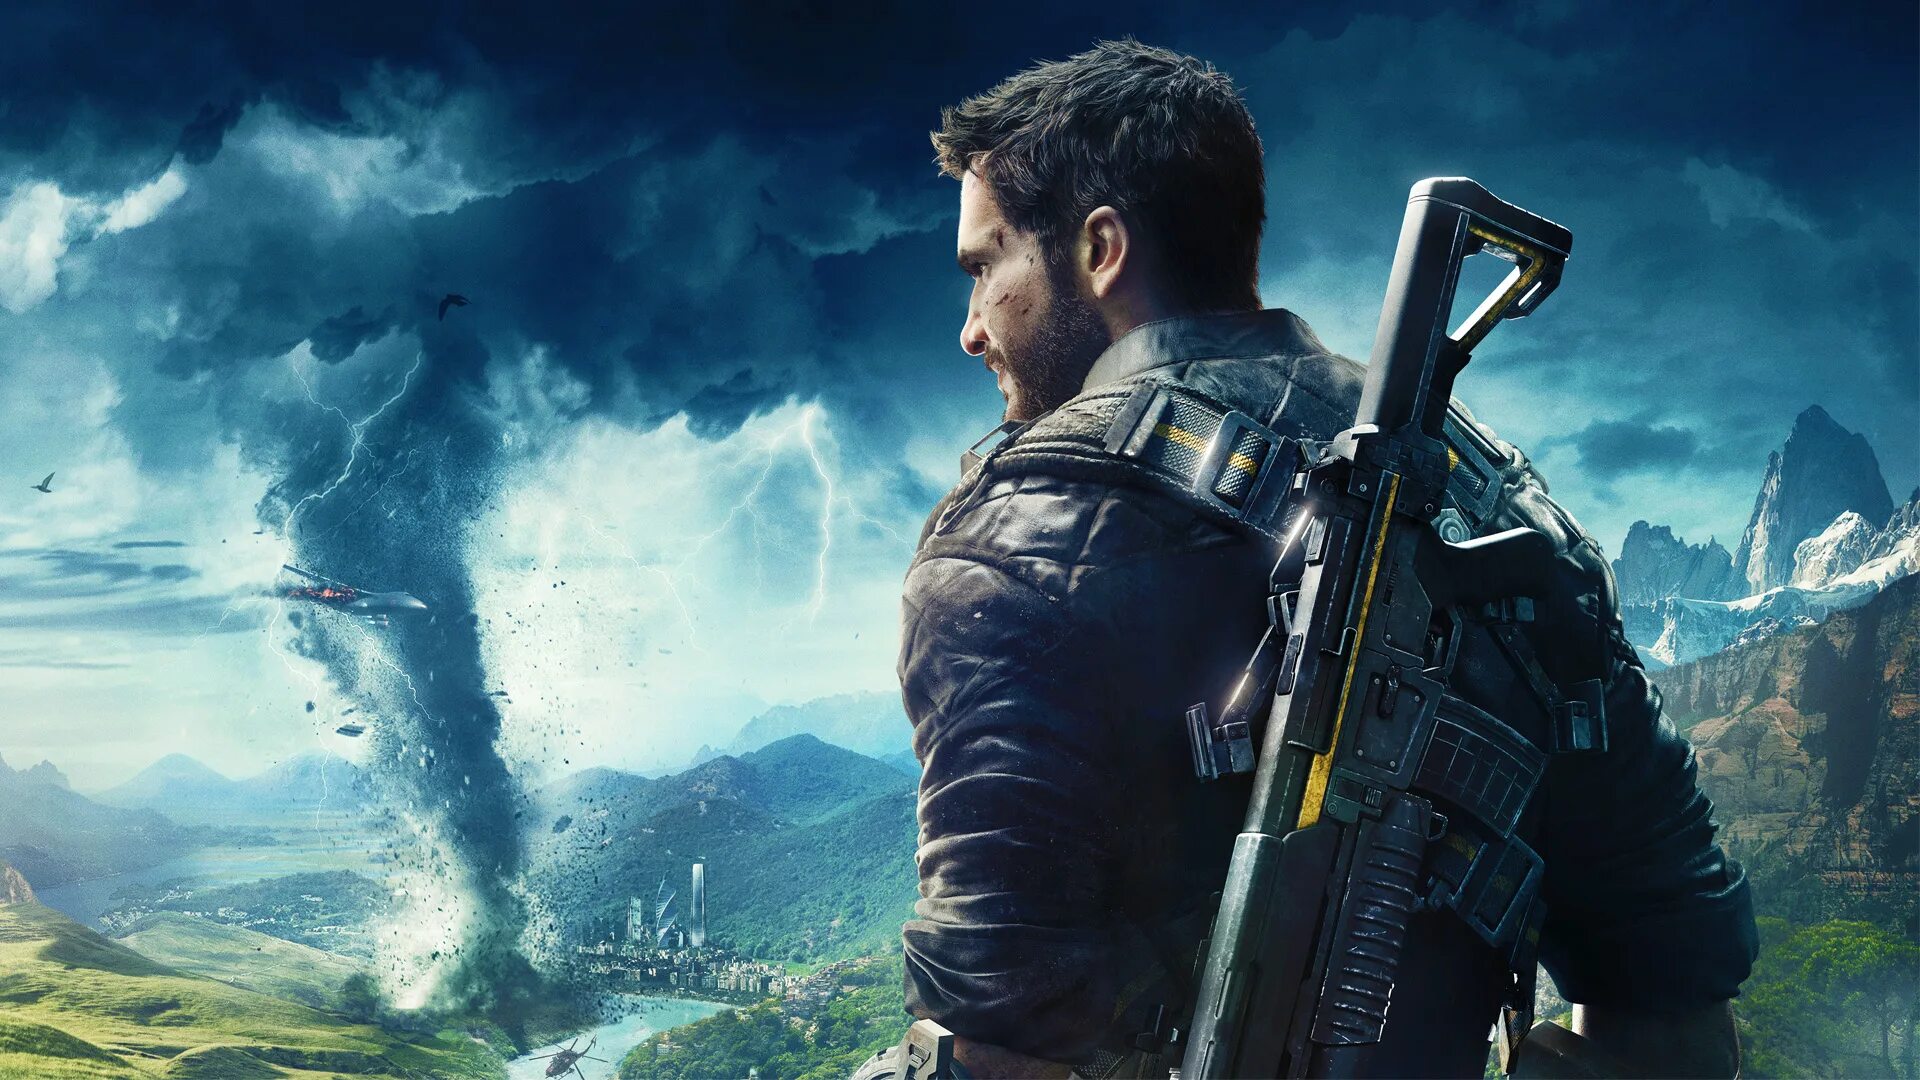 Рико Родригез just cause. Just cause 4. Just cause 4 Рико. Just cause 4: новая обойма.